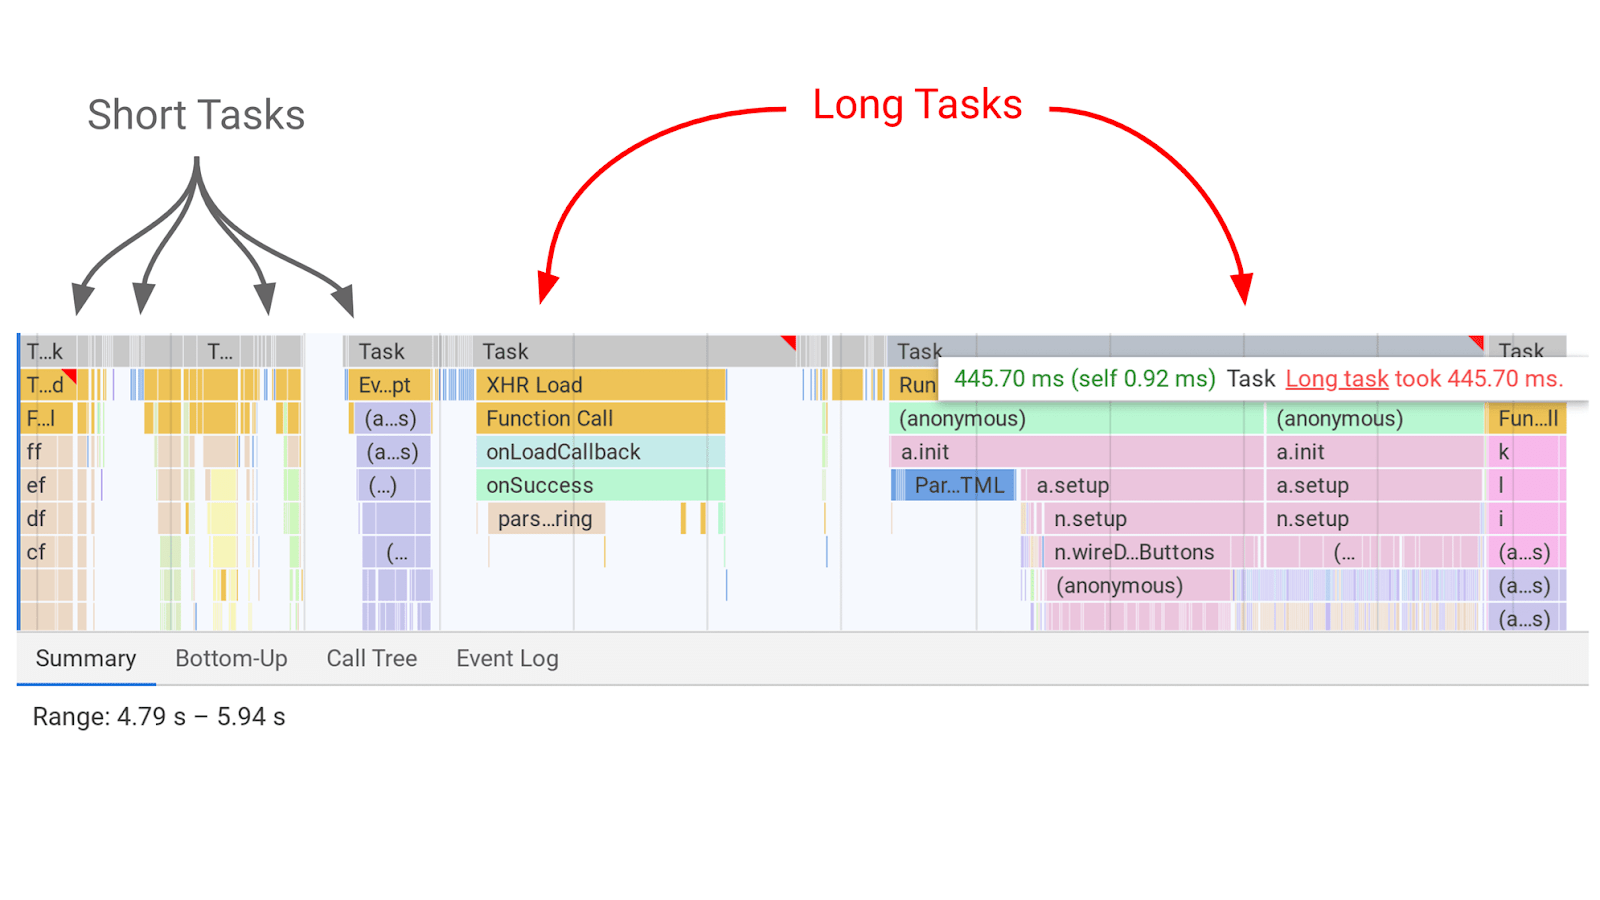 Long tasks block the processing on the main thread and cause delays